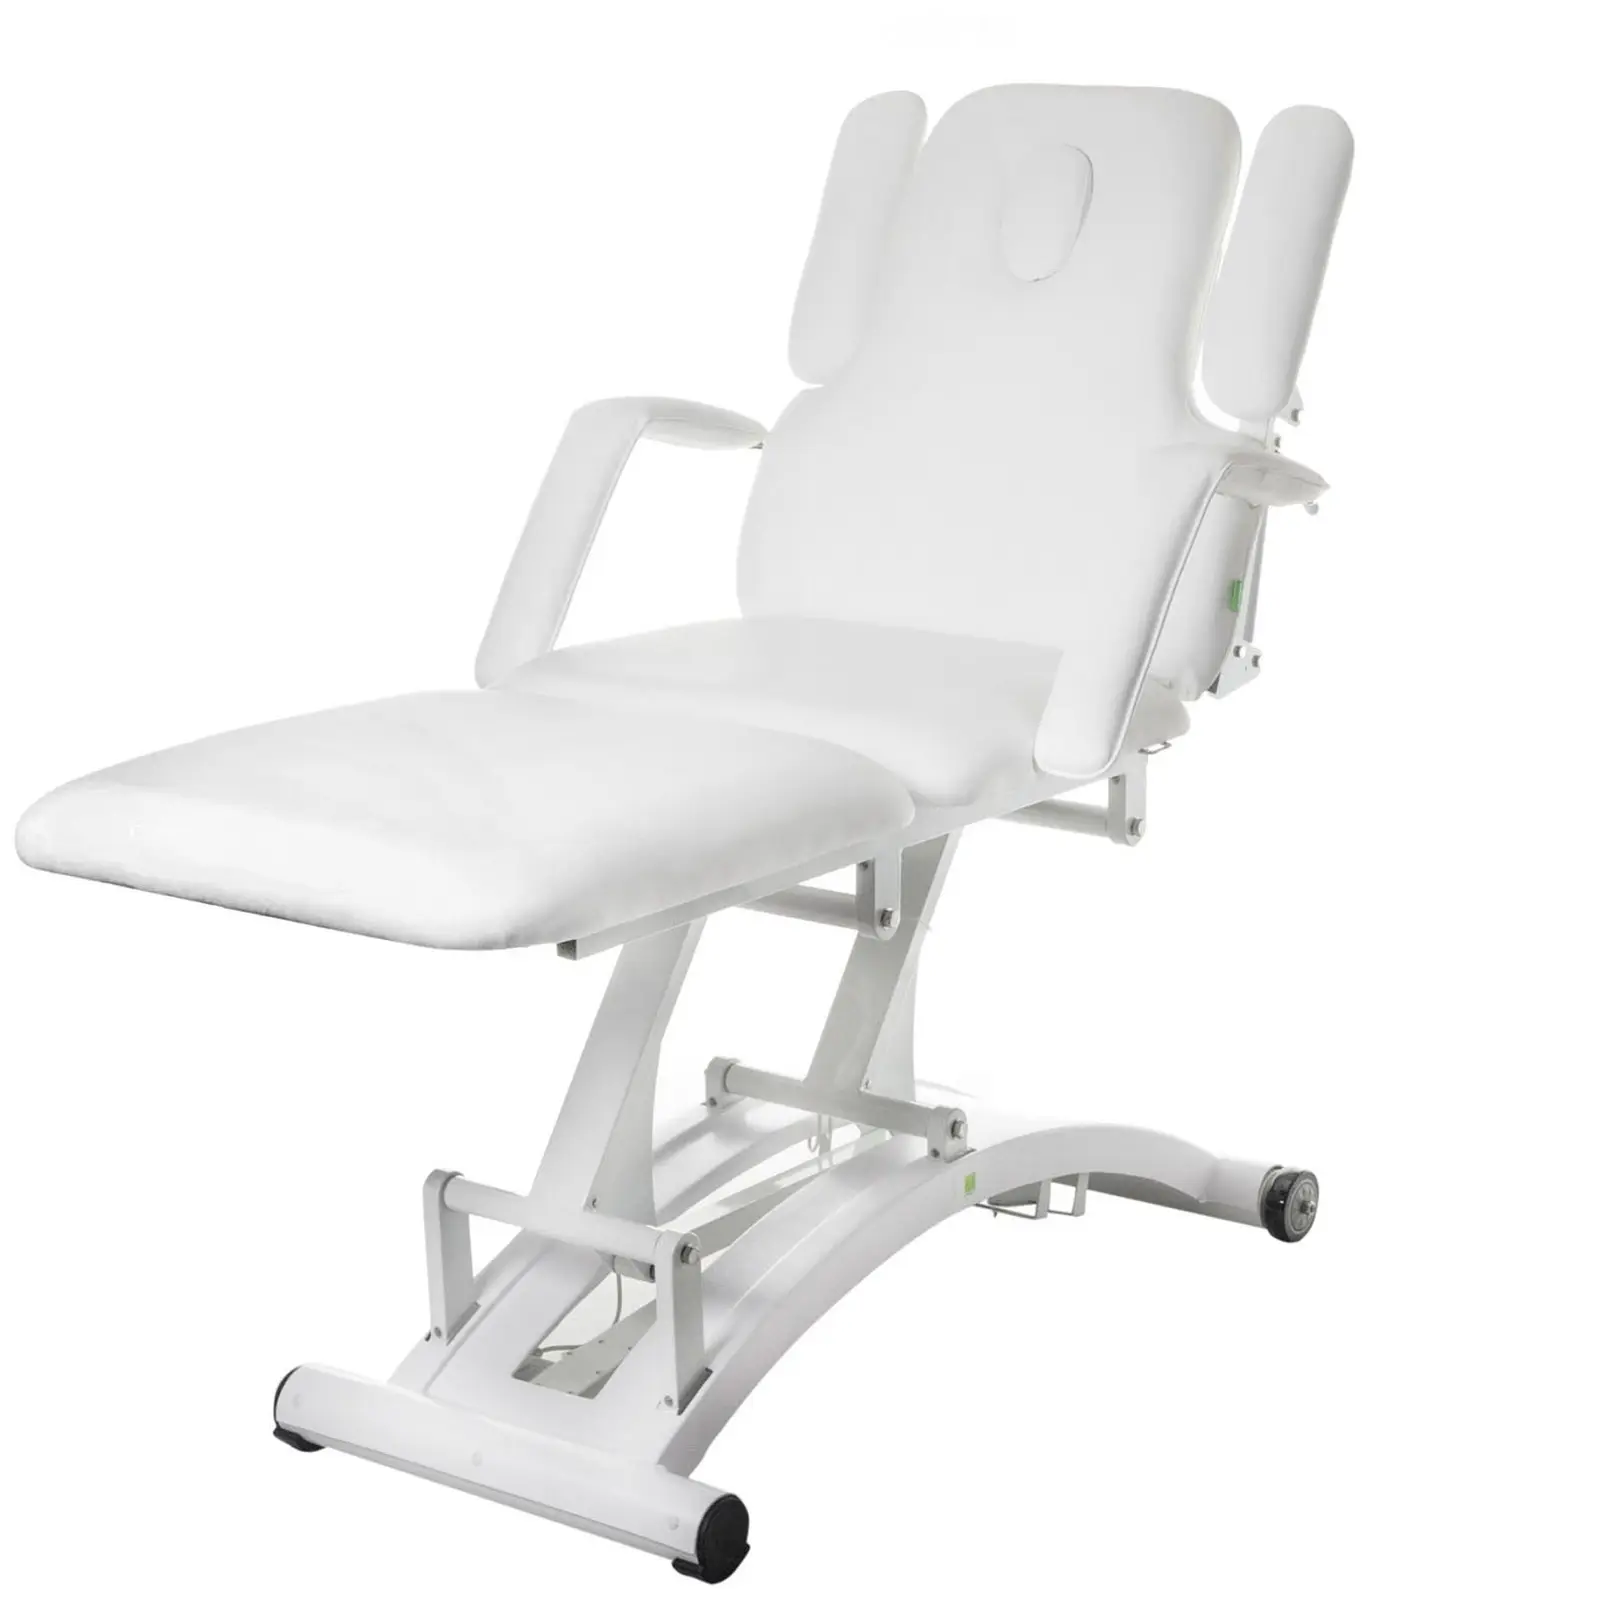 Electric Massage Table and Saddle Stool Set - 3 motors - remote control - white